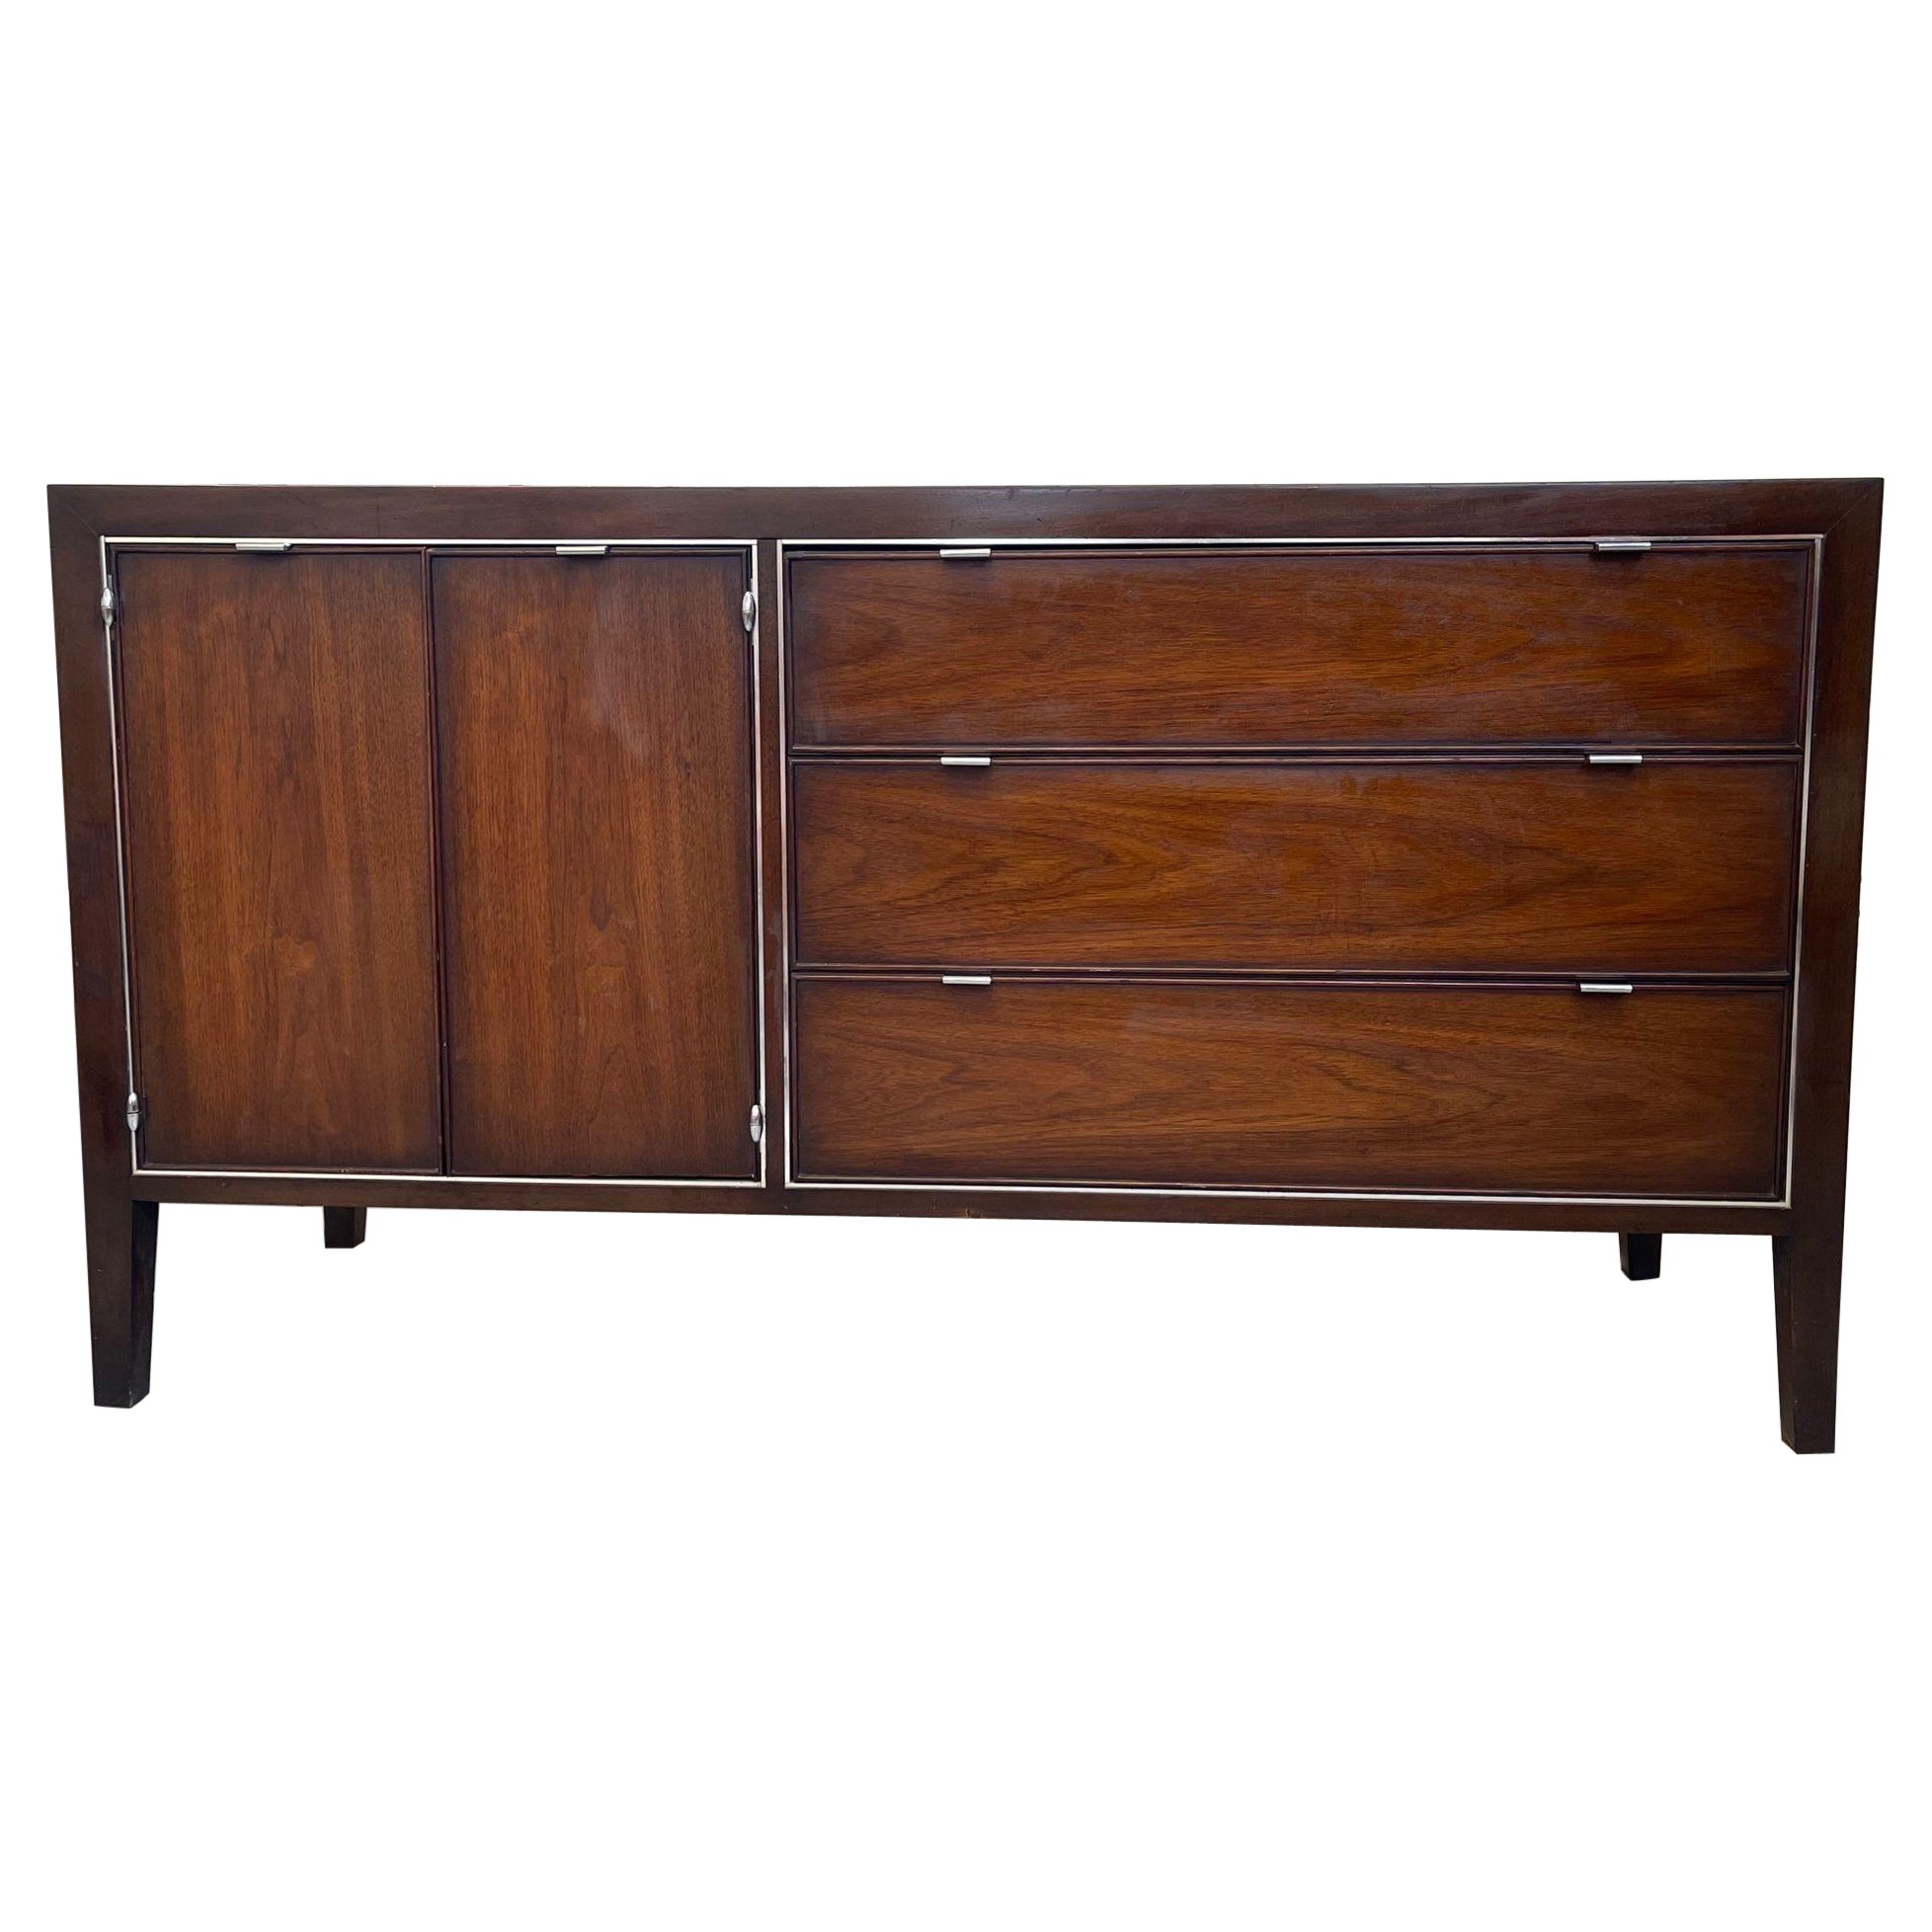 Vintage Mid Century Modern Drexel Credenza Cabinet With Chrome Toned Hardware. For Sale